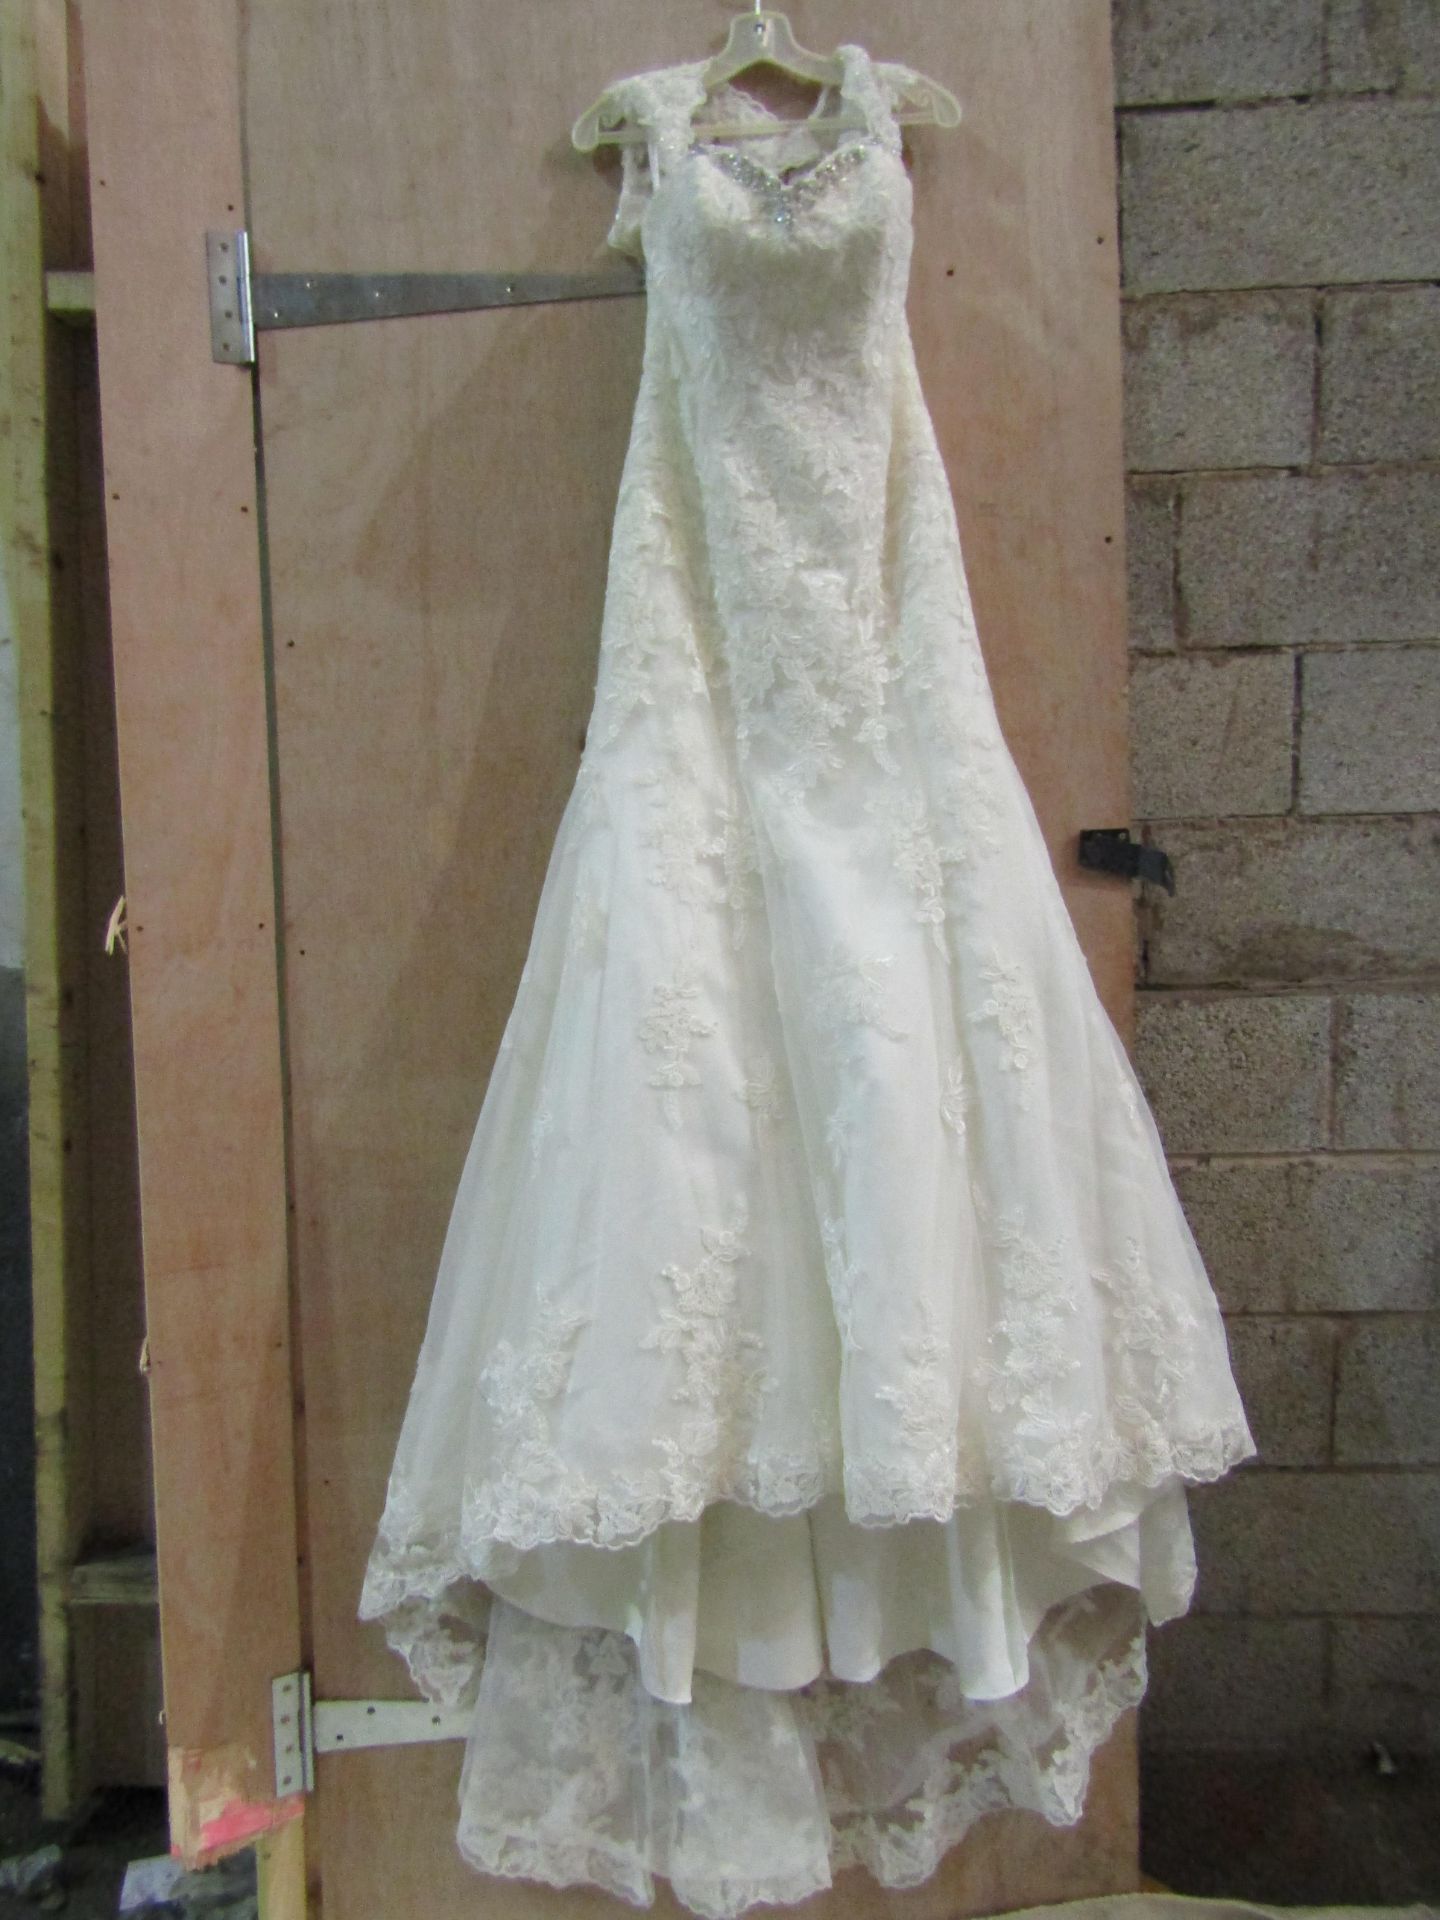 Approx 500 pieces of wedding shop stock to include wedding dresses, mother of the bride, dresses, - Image 35 of 43